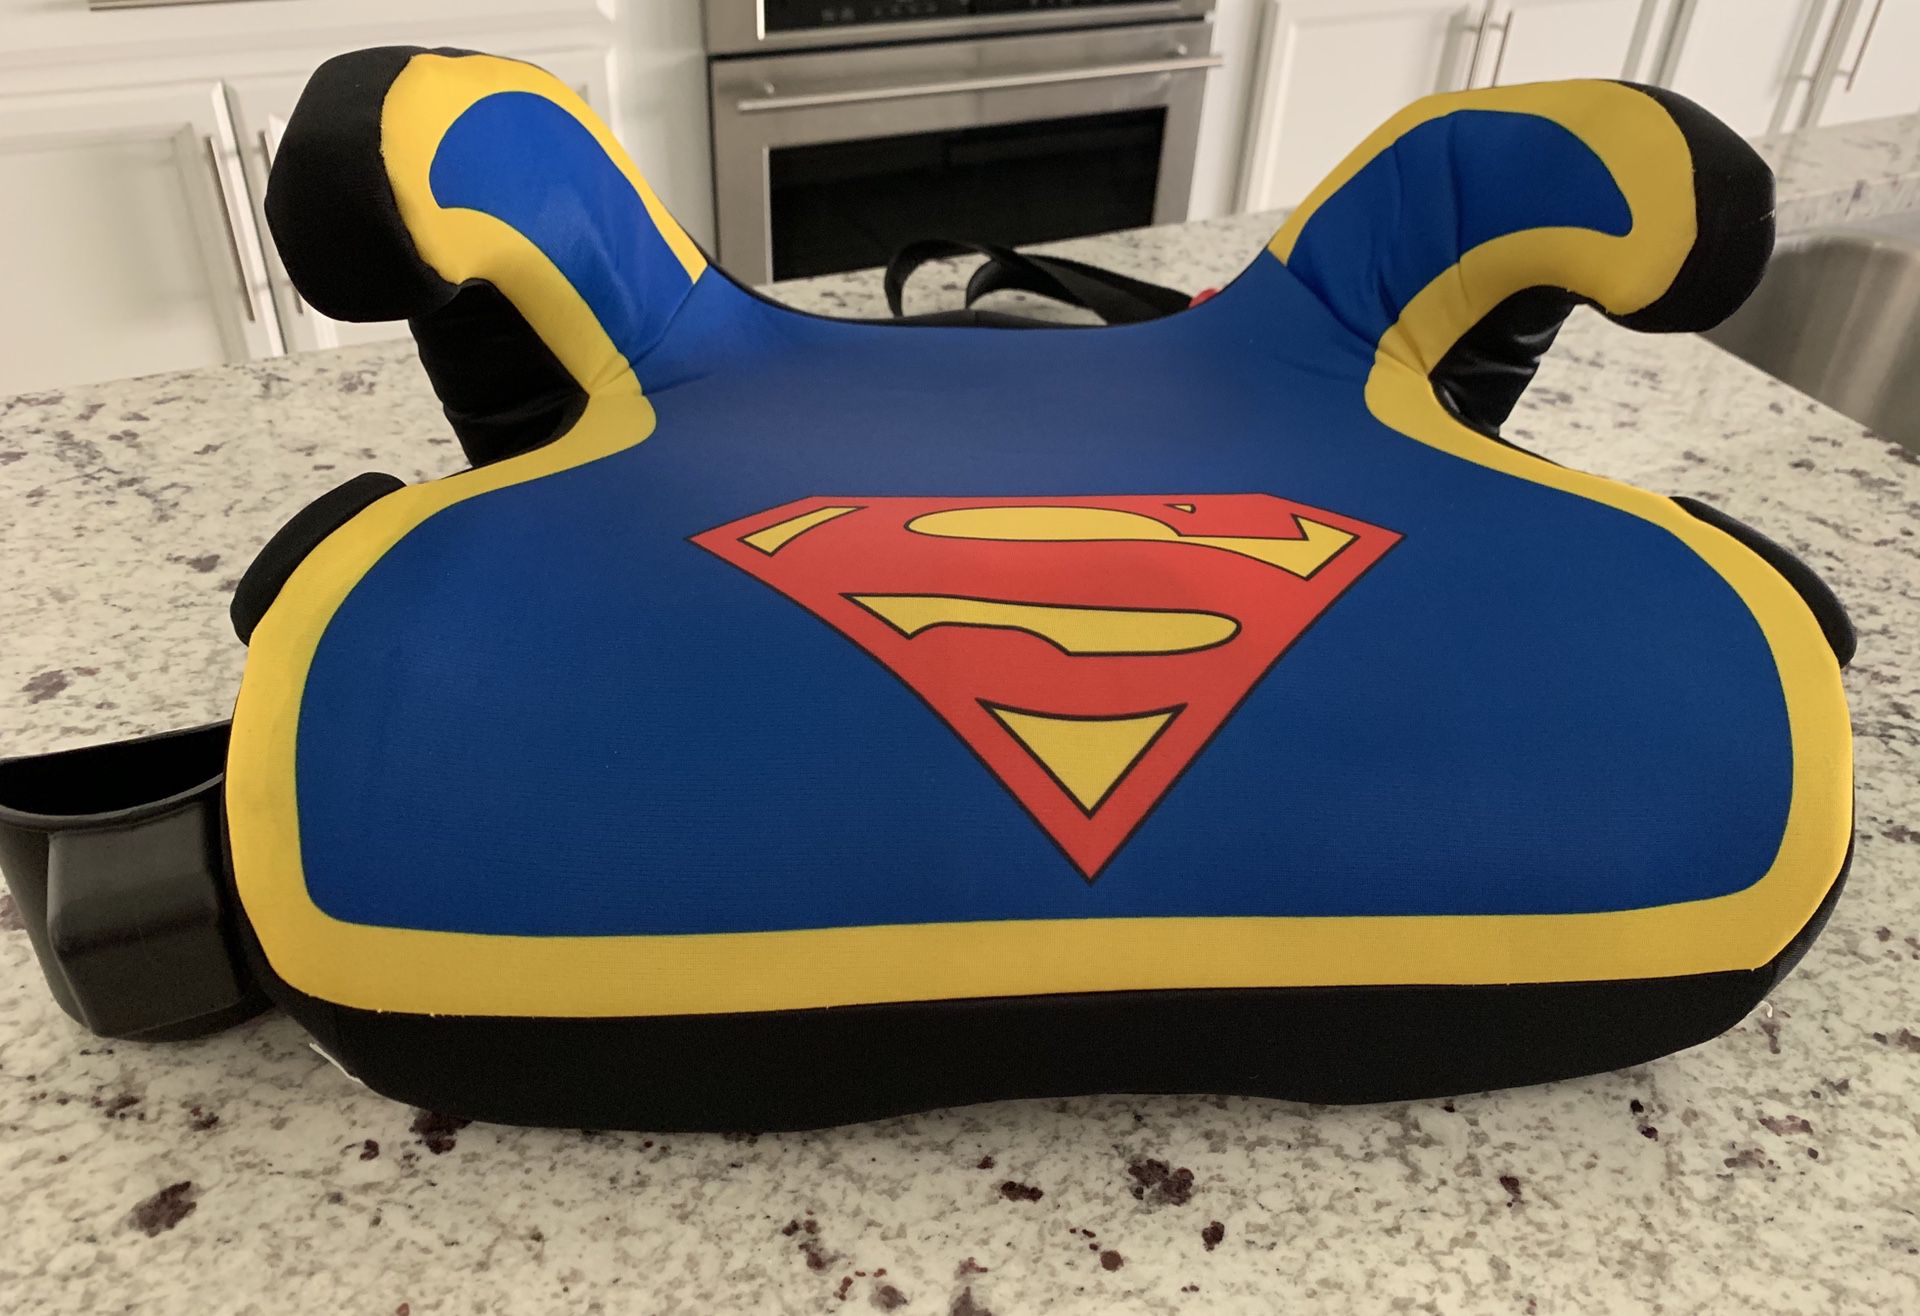 New KidsEmbrace Superman Booster Car Seat, DC Comics Youth Backless Seat SUMMERLIN